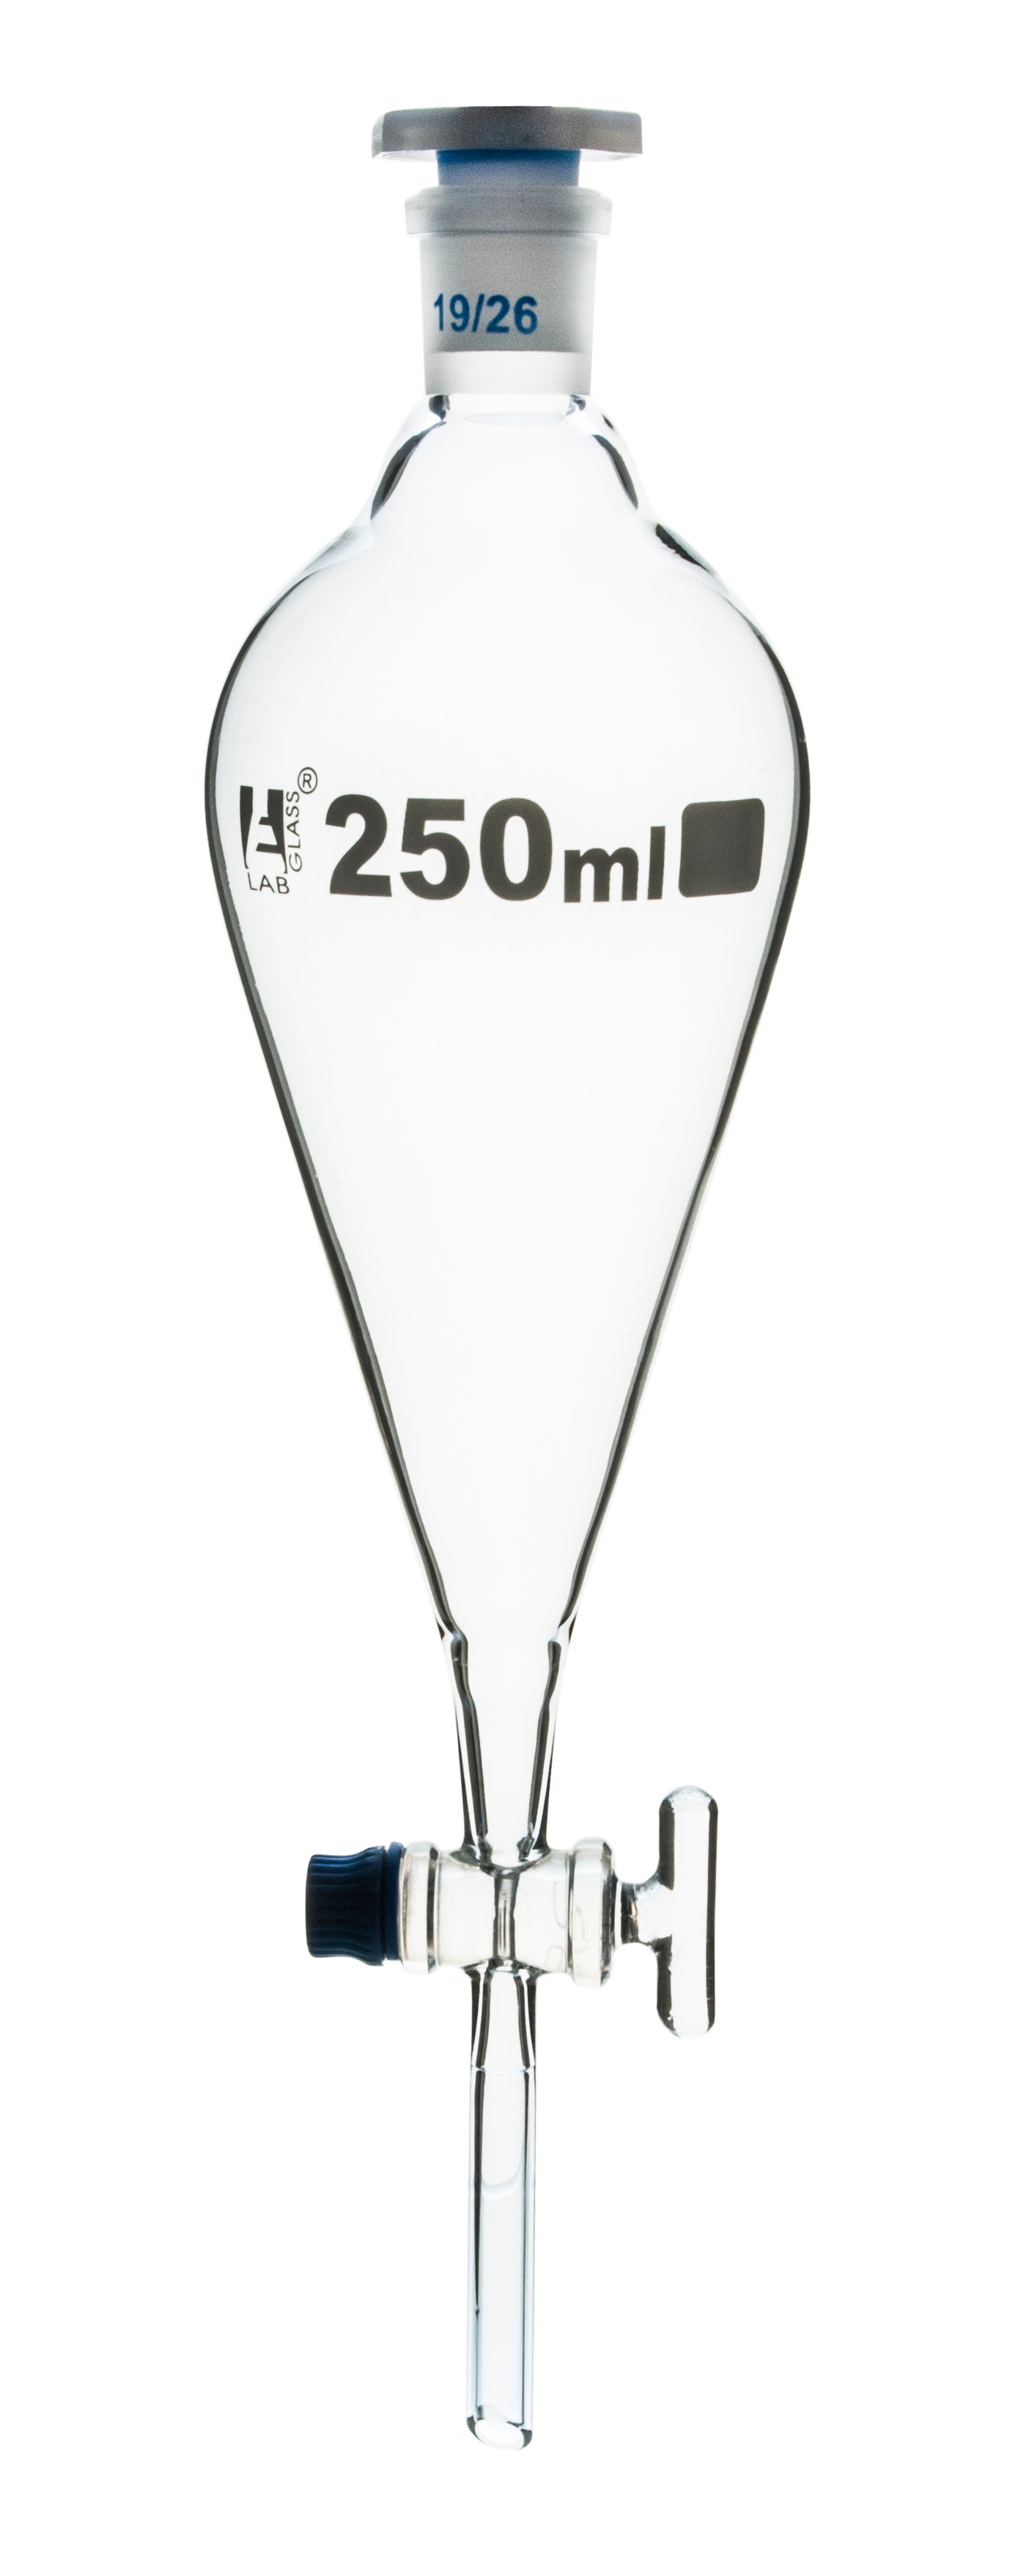 Glass Squibb Separatory Funnel with Glass Key Stopcock and Interchangeable Polypropylene Stopper, 250 ml, Autoclavable